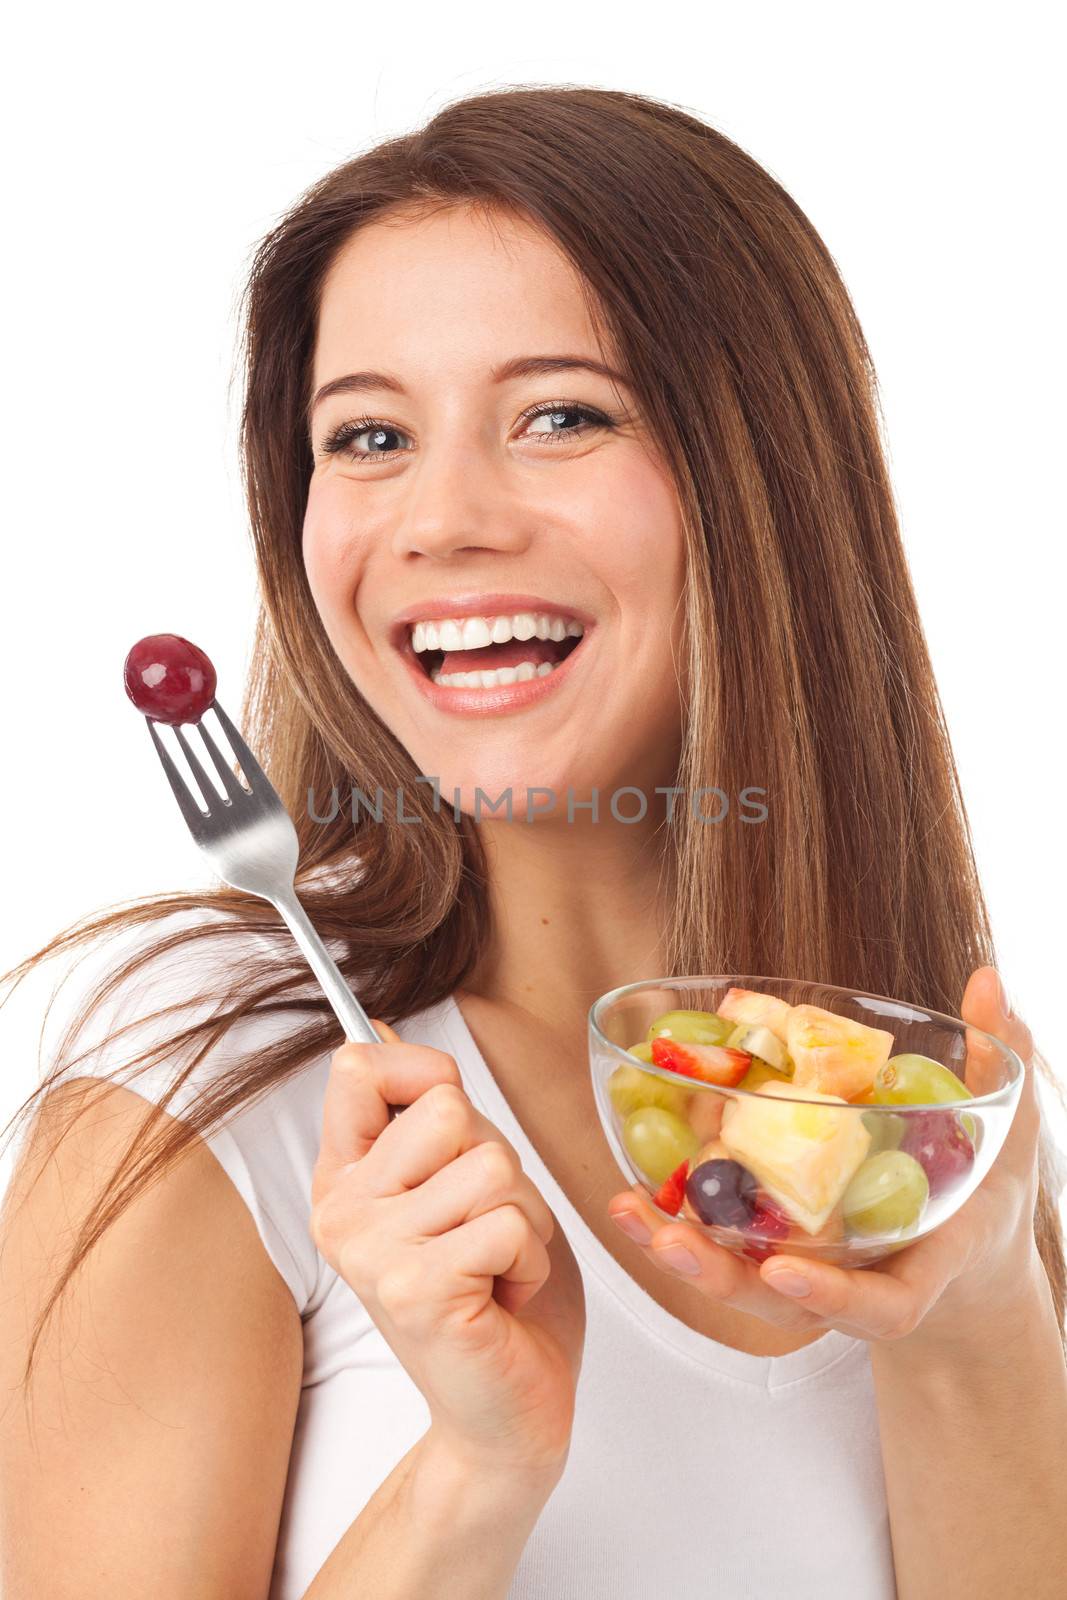 Beautiful woman eating fruits and smiling, isolated on white